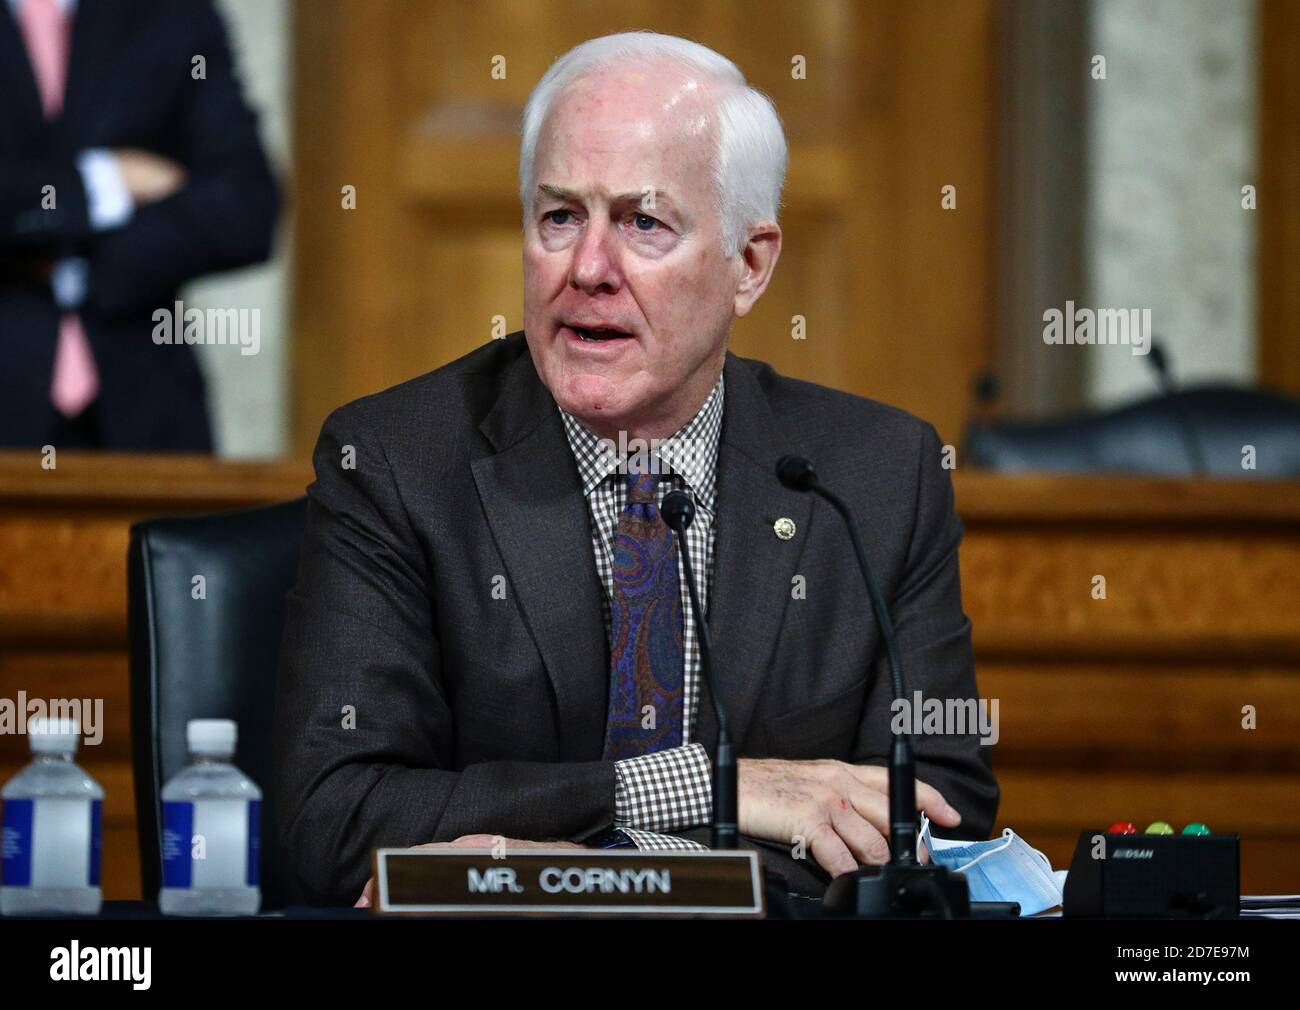 U.S. Senator John Cornyn (R-TX) attends a Senate Judiciary Committee meeting on the nomination of  Judge Amy Coney Barrett to be an associate justice of the U.S. Supreme Court on Capitol Hill in Washington, U.S., October 22, 2020. (Photo by Hannah McKay/Pool/Sipa USA) Stock Photo